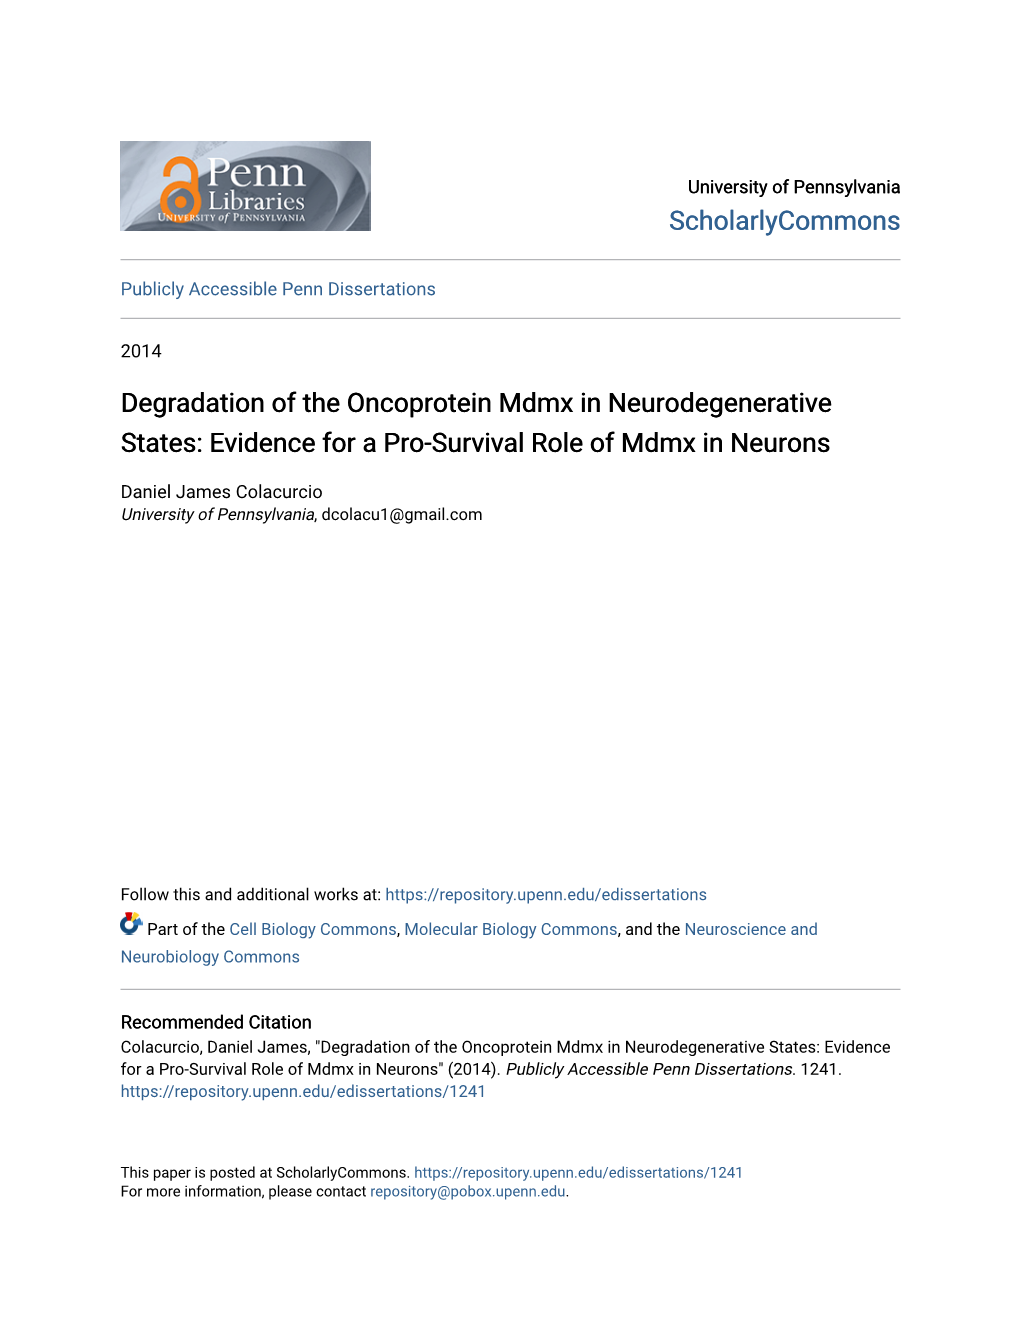 Degradation of the Oncoprotein Mdmx in Neurodegenerative States: Evidence for a Pro-Survival Role of Mdmx in Neurons